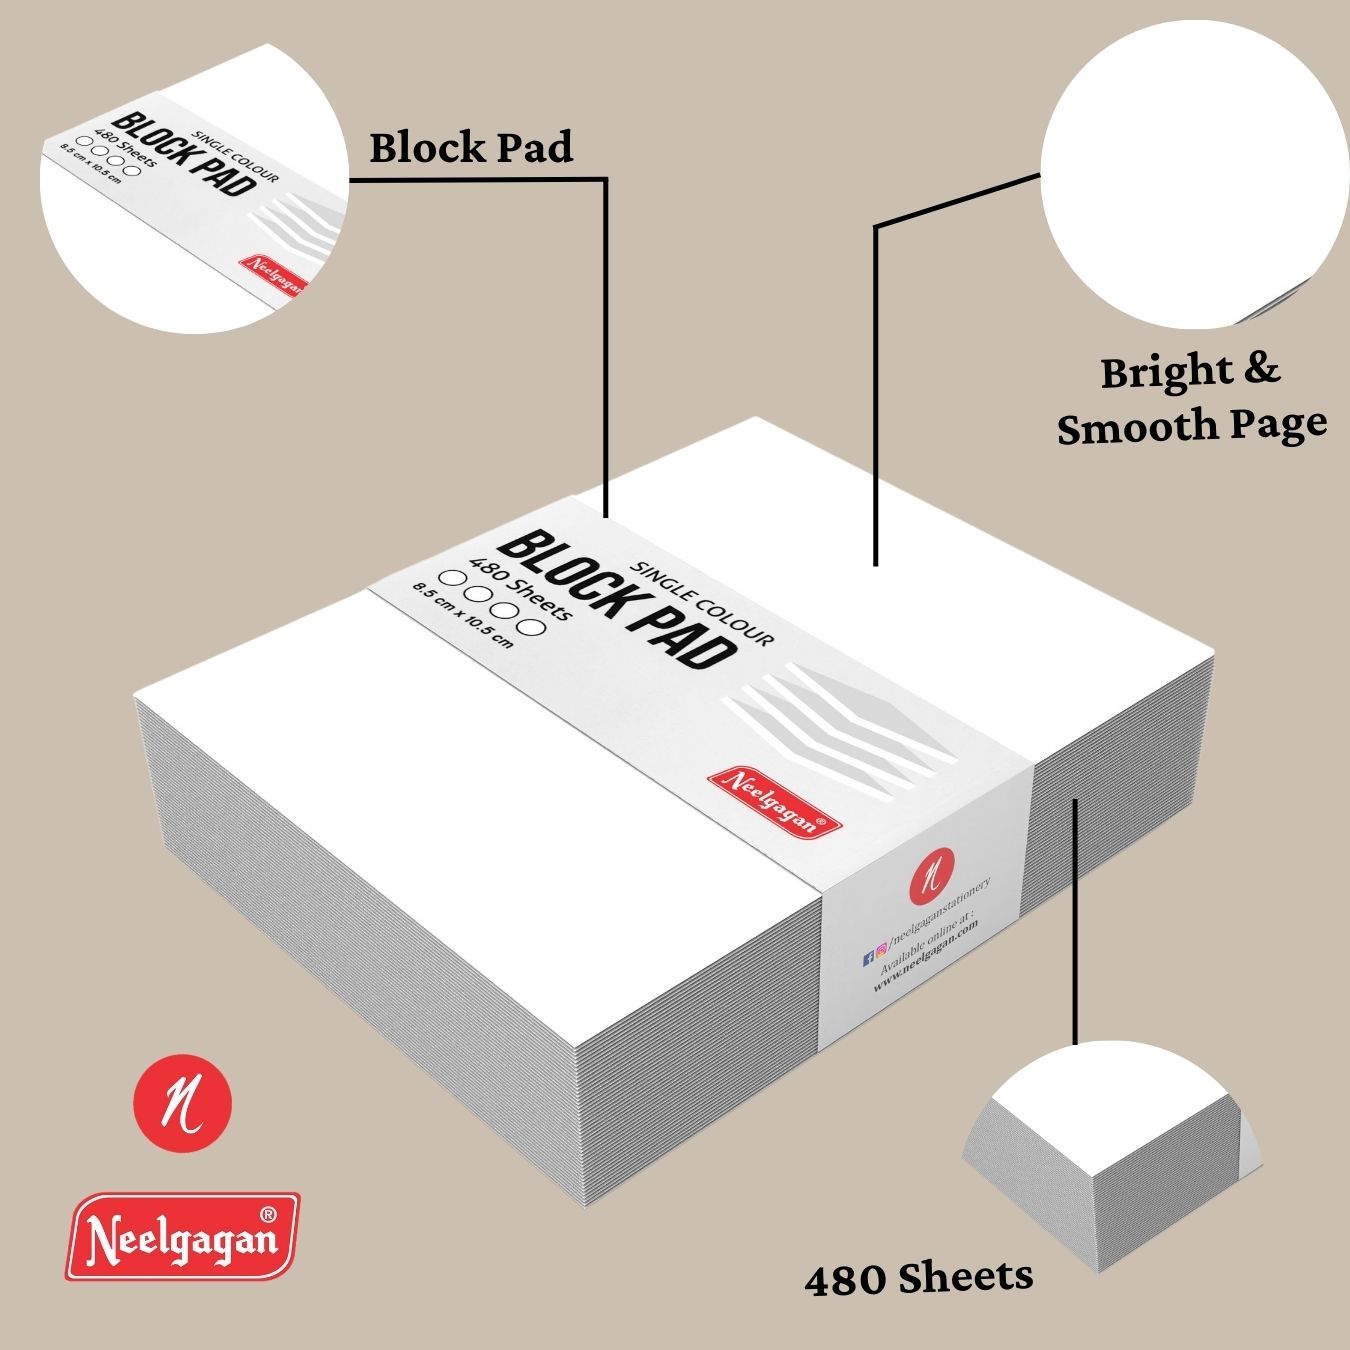 Paper Block Pad (Memo Pad), 480 Pages (Mixed and White) (8.5 cm x 10.5 cm)